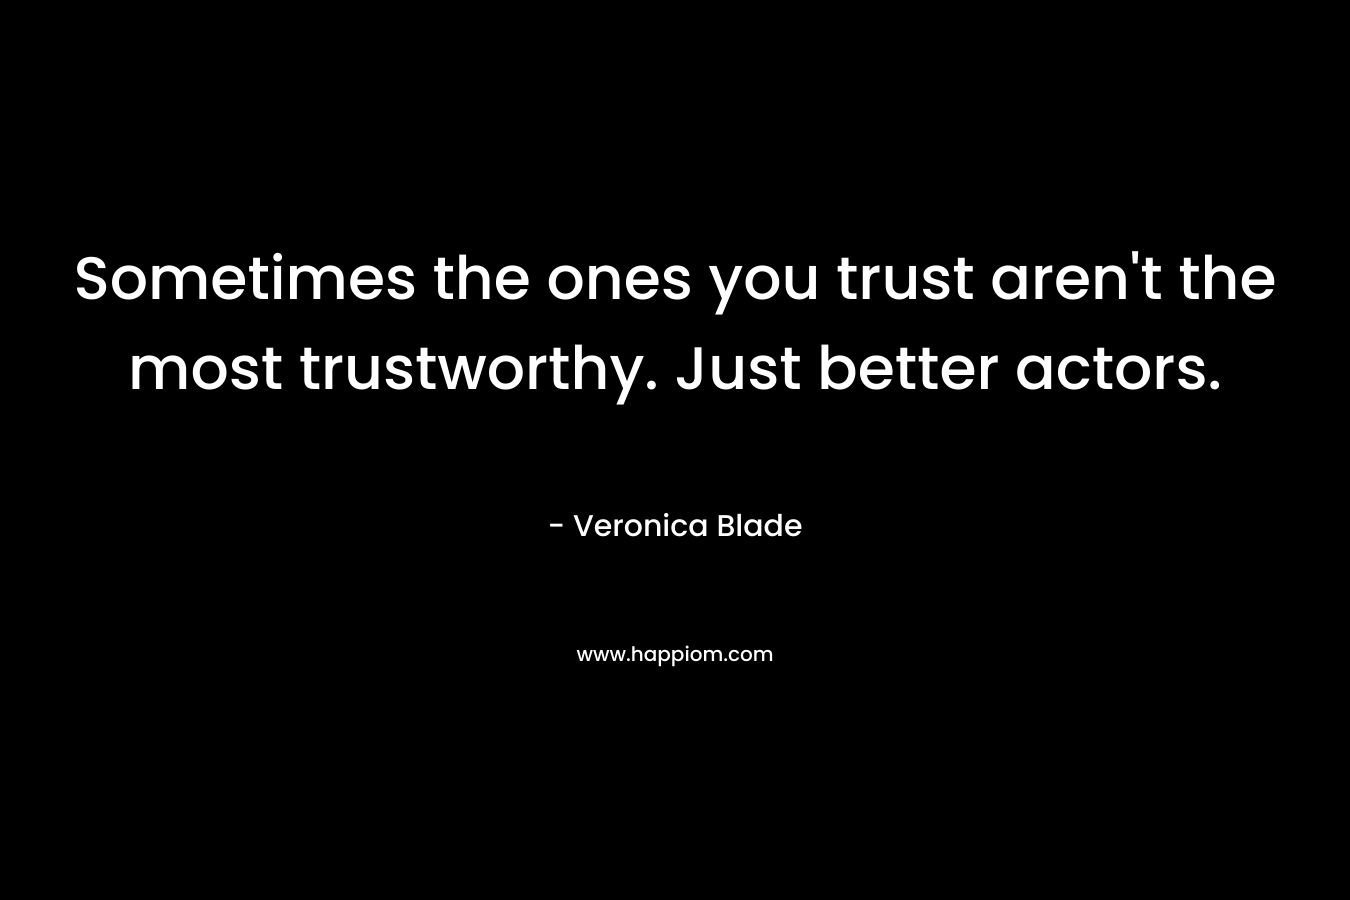 Sometimes the ones you trust aren't the most trustworthy. Just better actors.